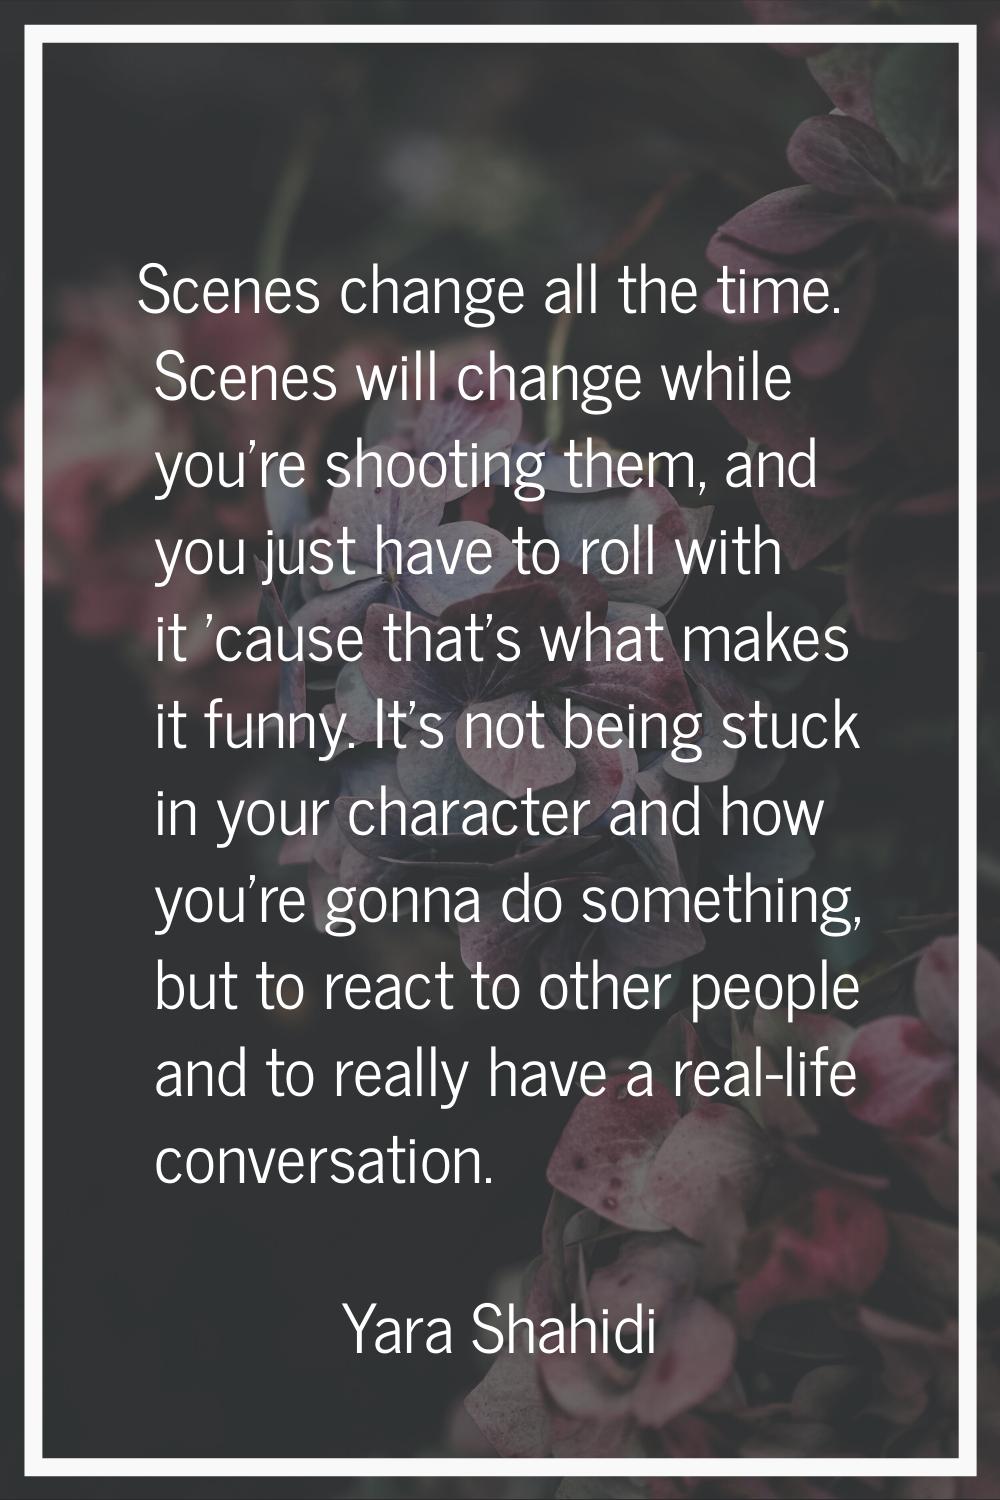 Scenes change all the time. Scenes will change while you're shooting them, and you just have to rol